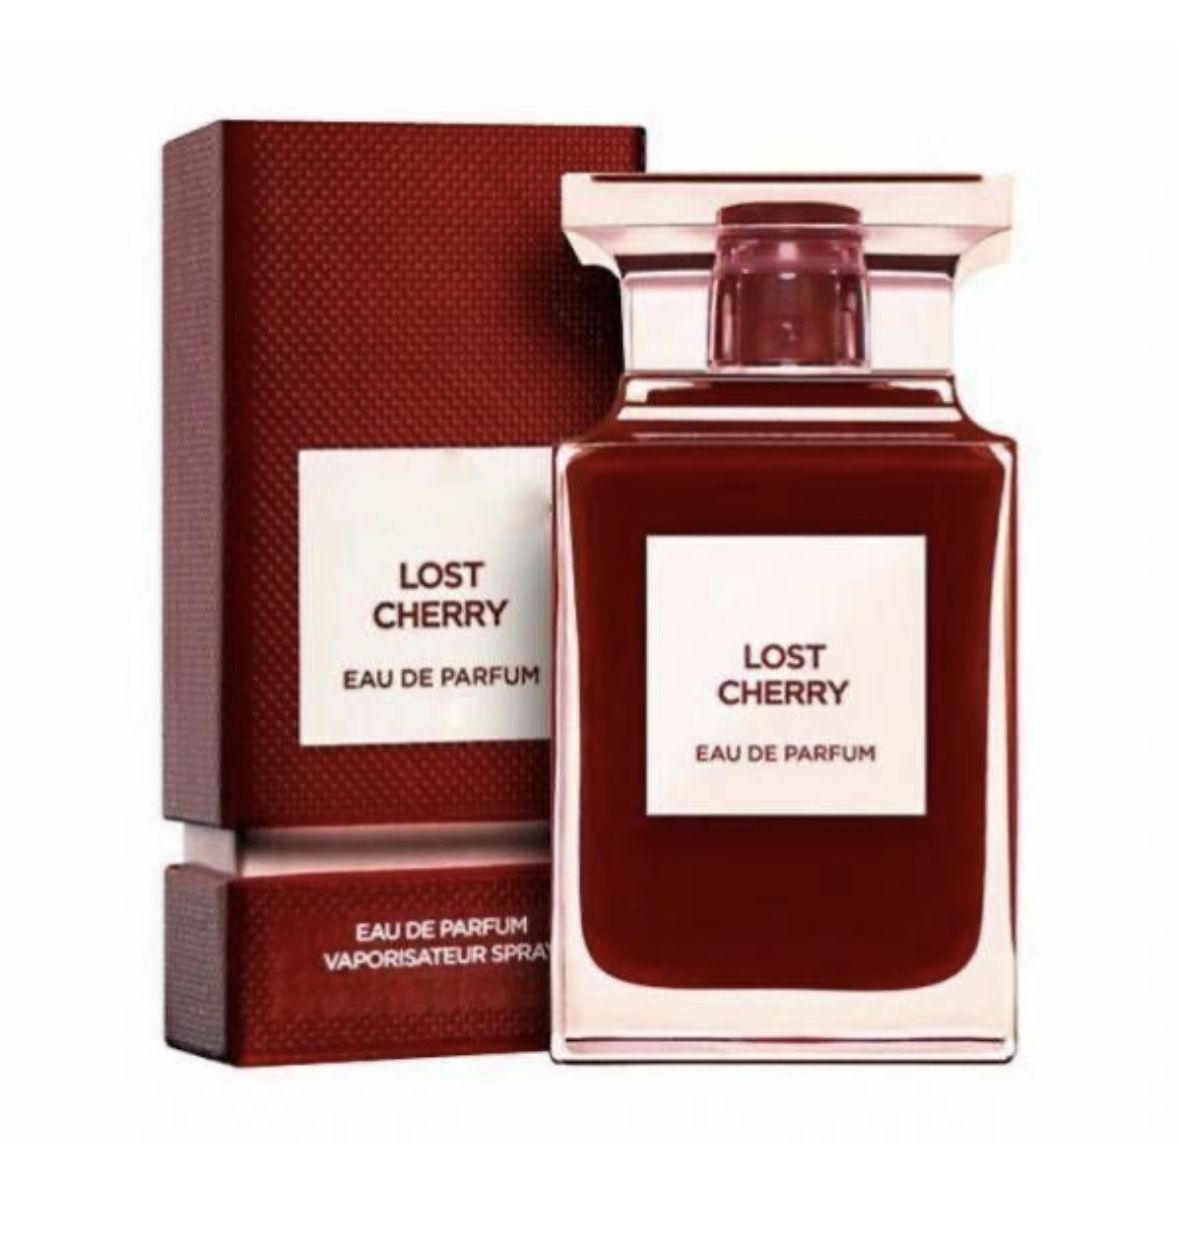 Tom Ford Lost Cherry EDP 100 ml. Tom Ford Lost Cherry 100ml 50ml. Духи Tom Ford Lost Cherry 100мл. Tom Ford Lost Cherry 50 ml. Lost cherry 100ml